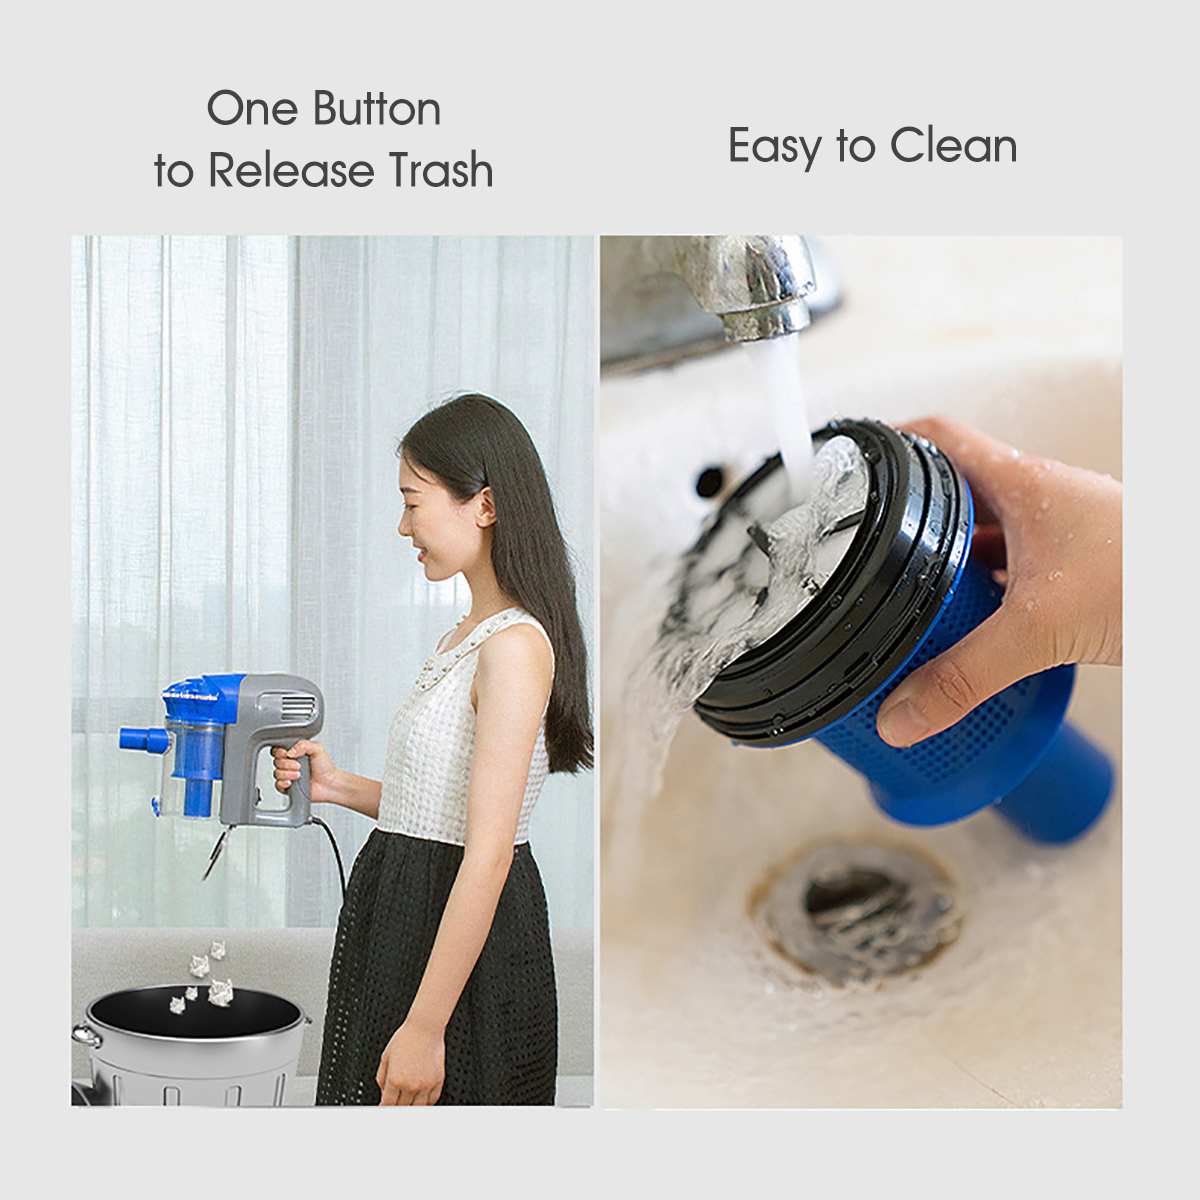 2-IN-1 Handheld Vacuum Cleaner Pusher Vacuums700W 13000PA Strong Suction Dust Collector Mite Killer Home Office Cleaning Tools